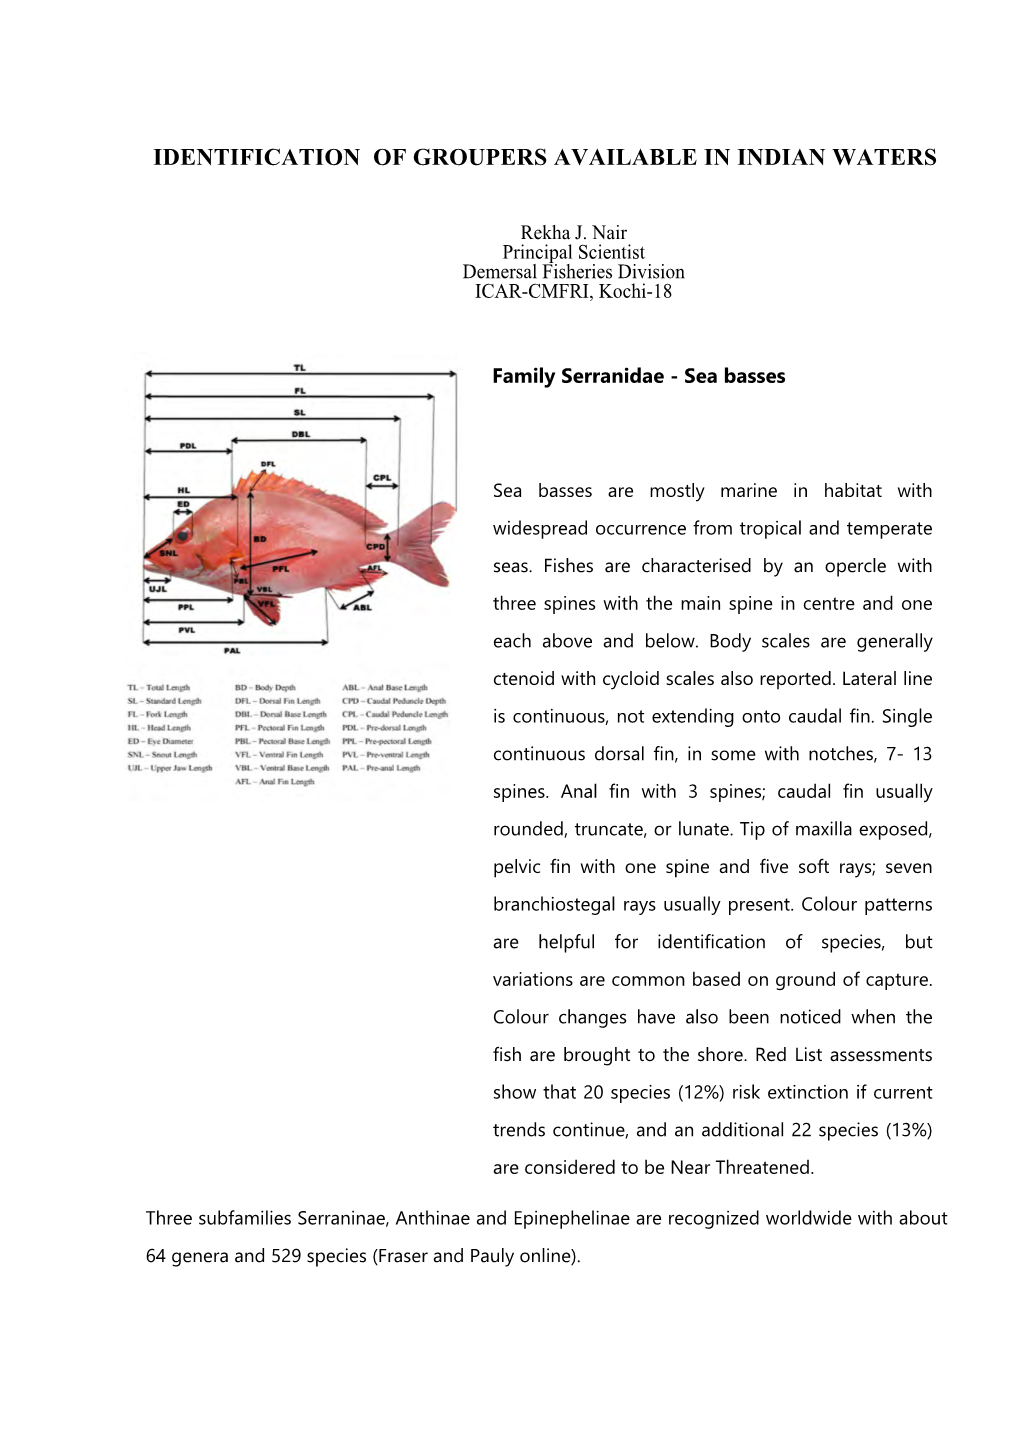 Identification of Groupers Available in Indian Waters